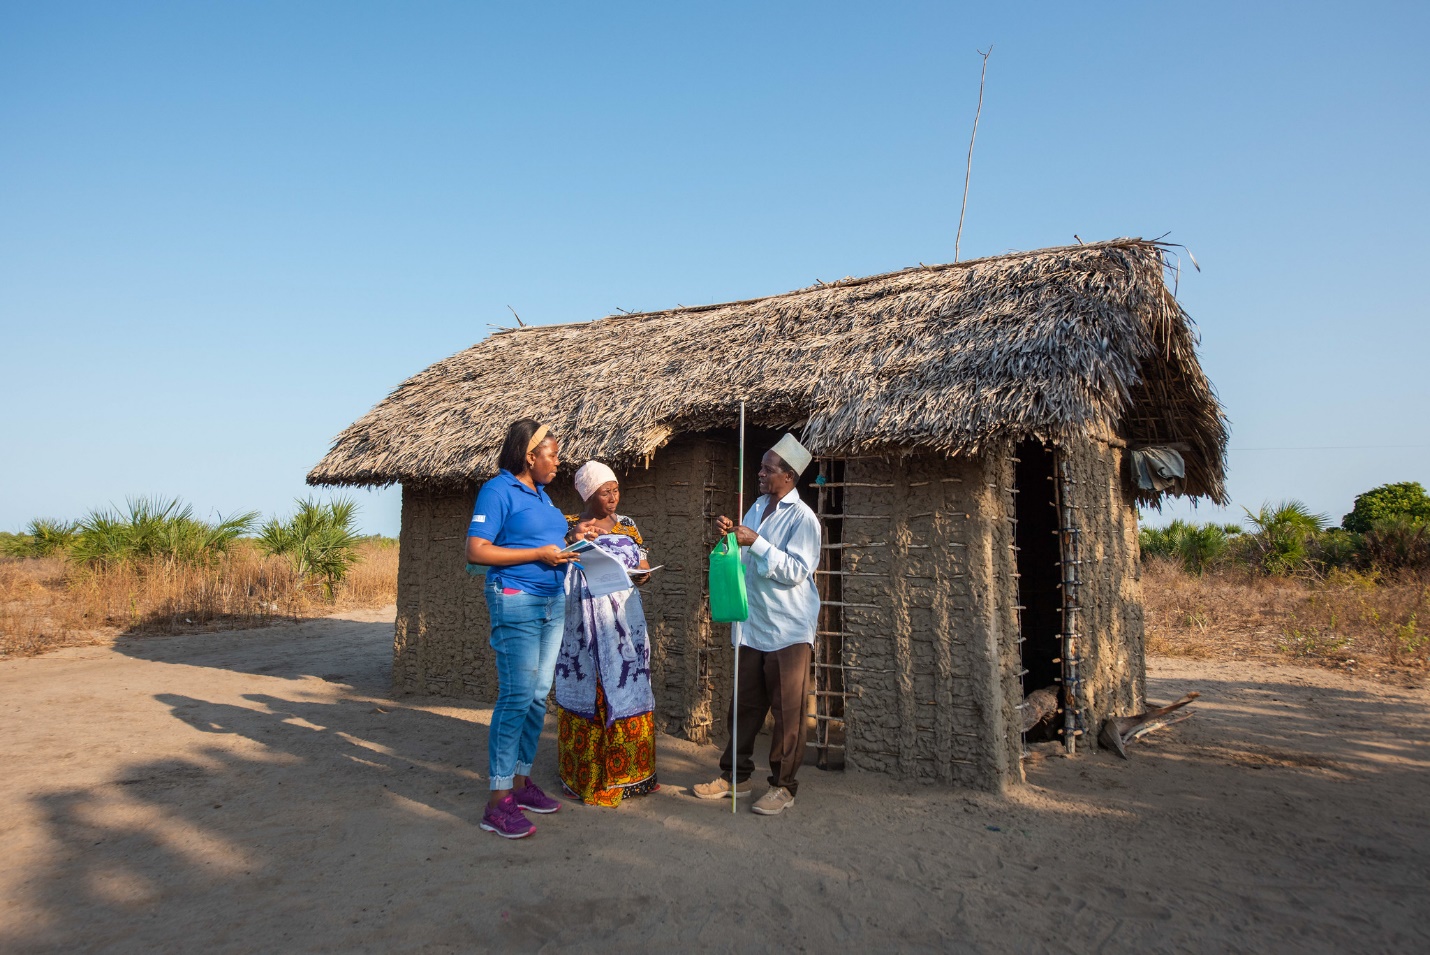 A group of people standing outside a hut  Description automatically generated with medium confidence